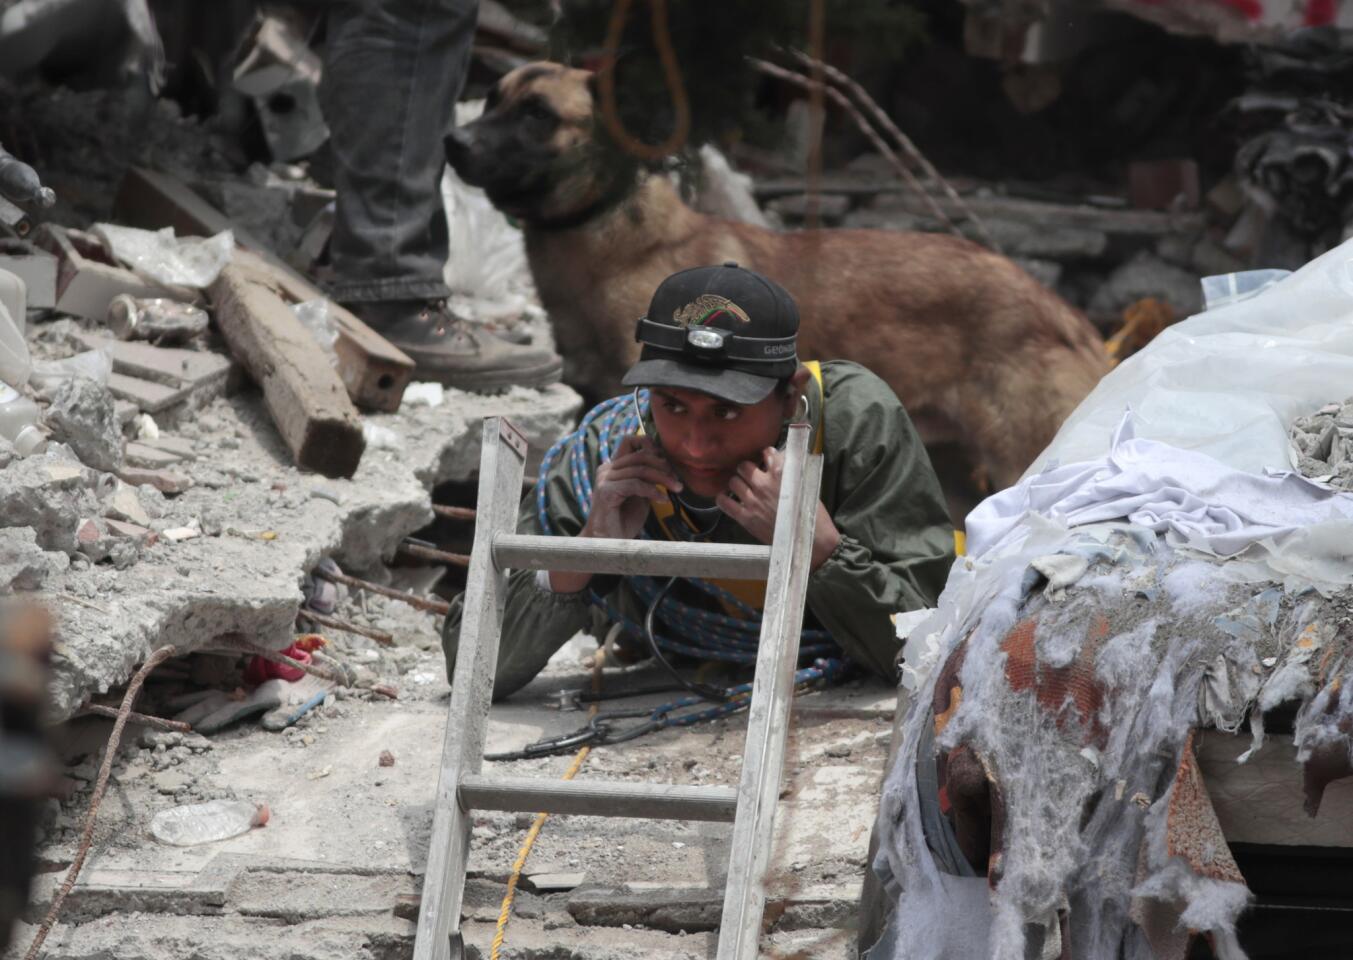 A rescuer listens for signs of life in a building felled by the earthquake in Mexico City.